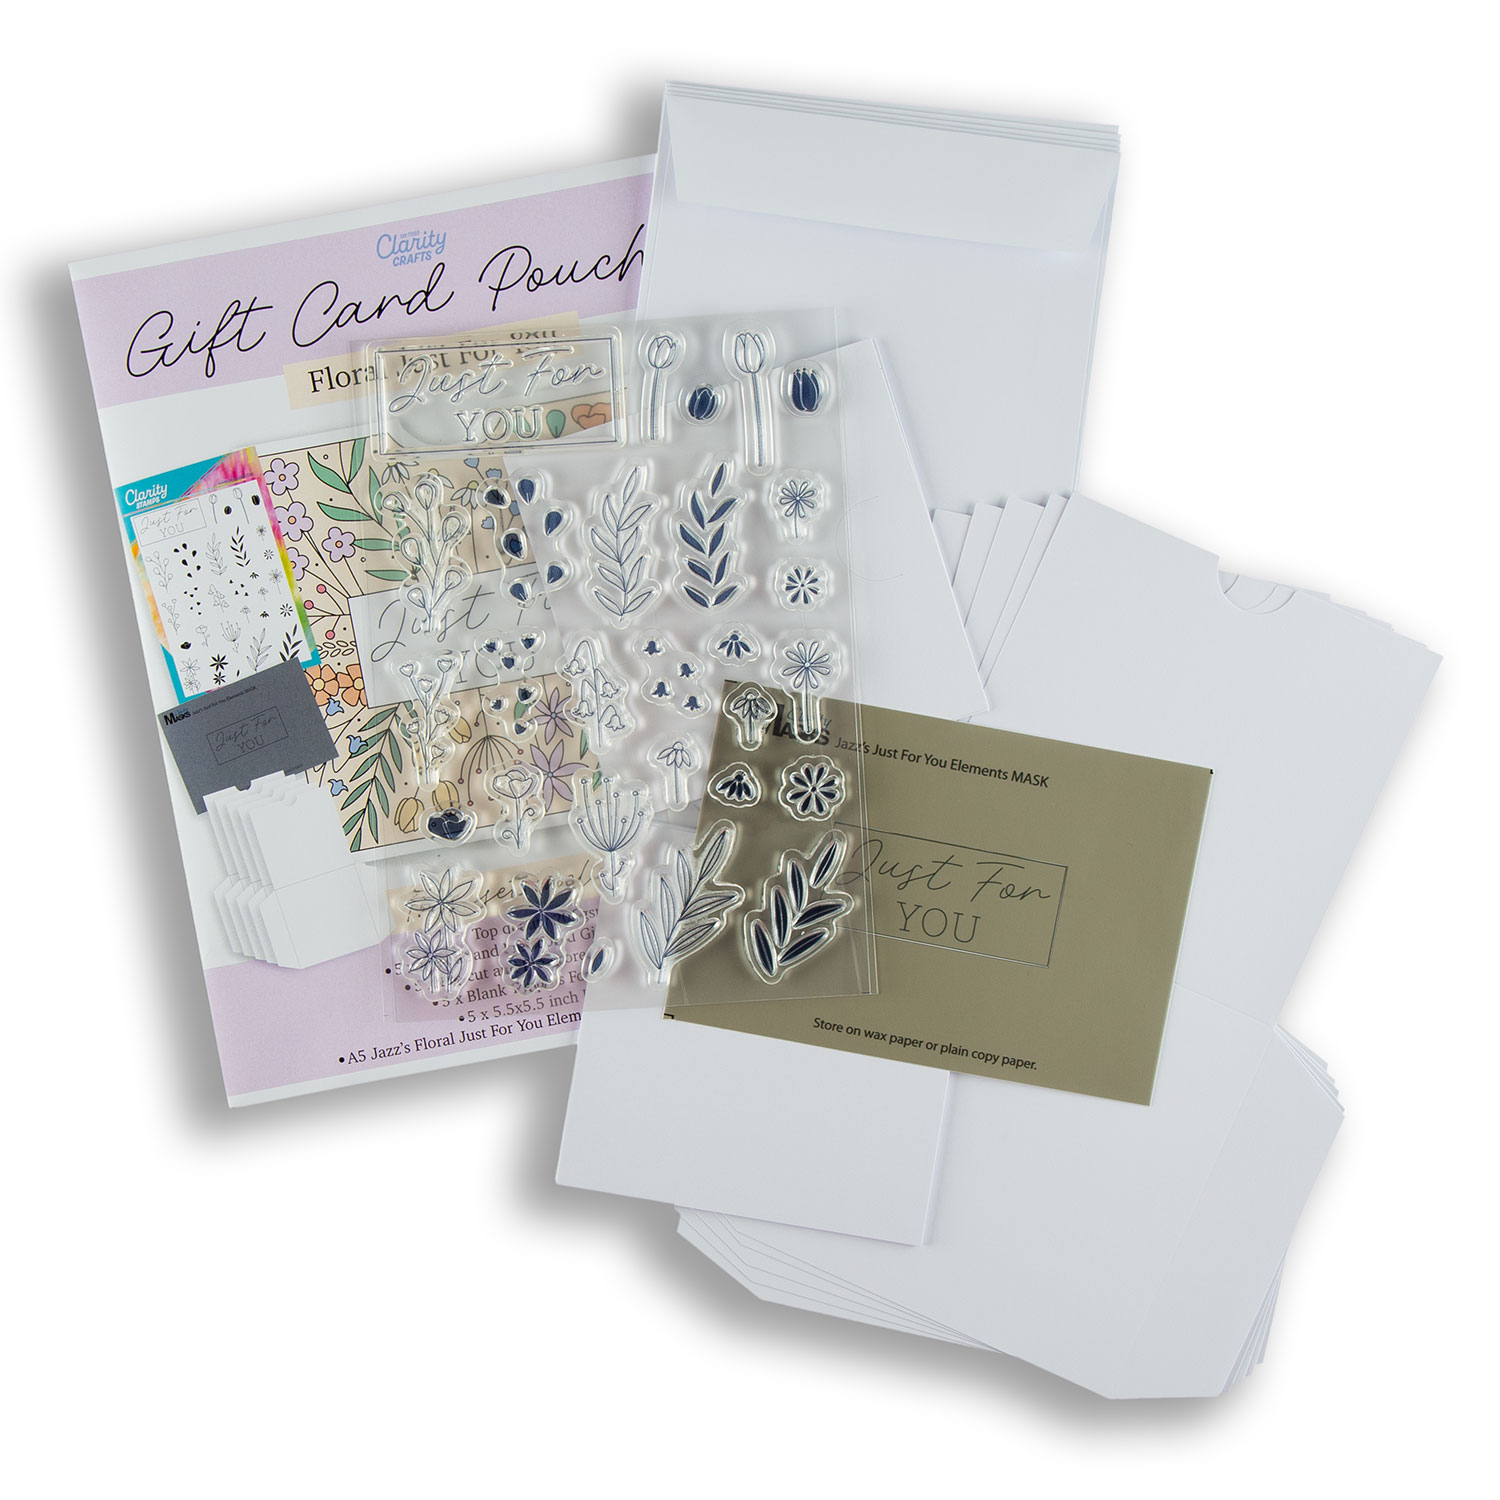 Clarity Crafts Voucher Pouch A5 Stamp & A6 Mask Set with Die Cut Wallets & Envelopes Pick-n-Mix - Choose 2 - Jazz's Just for You Elements